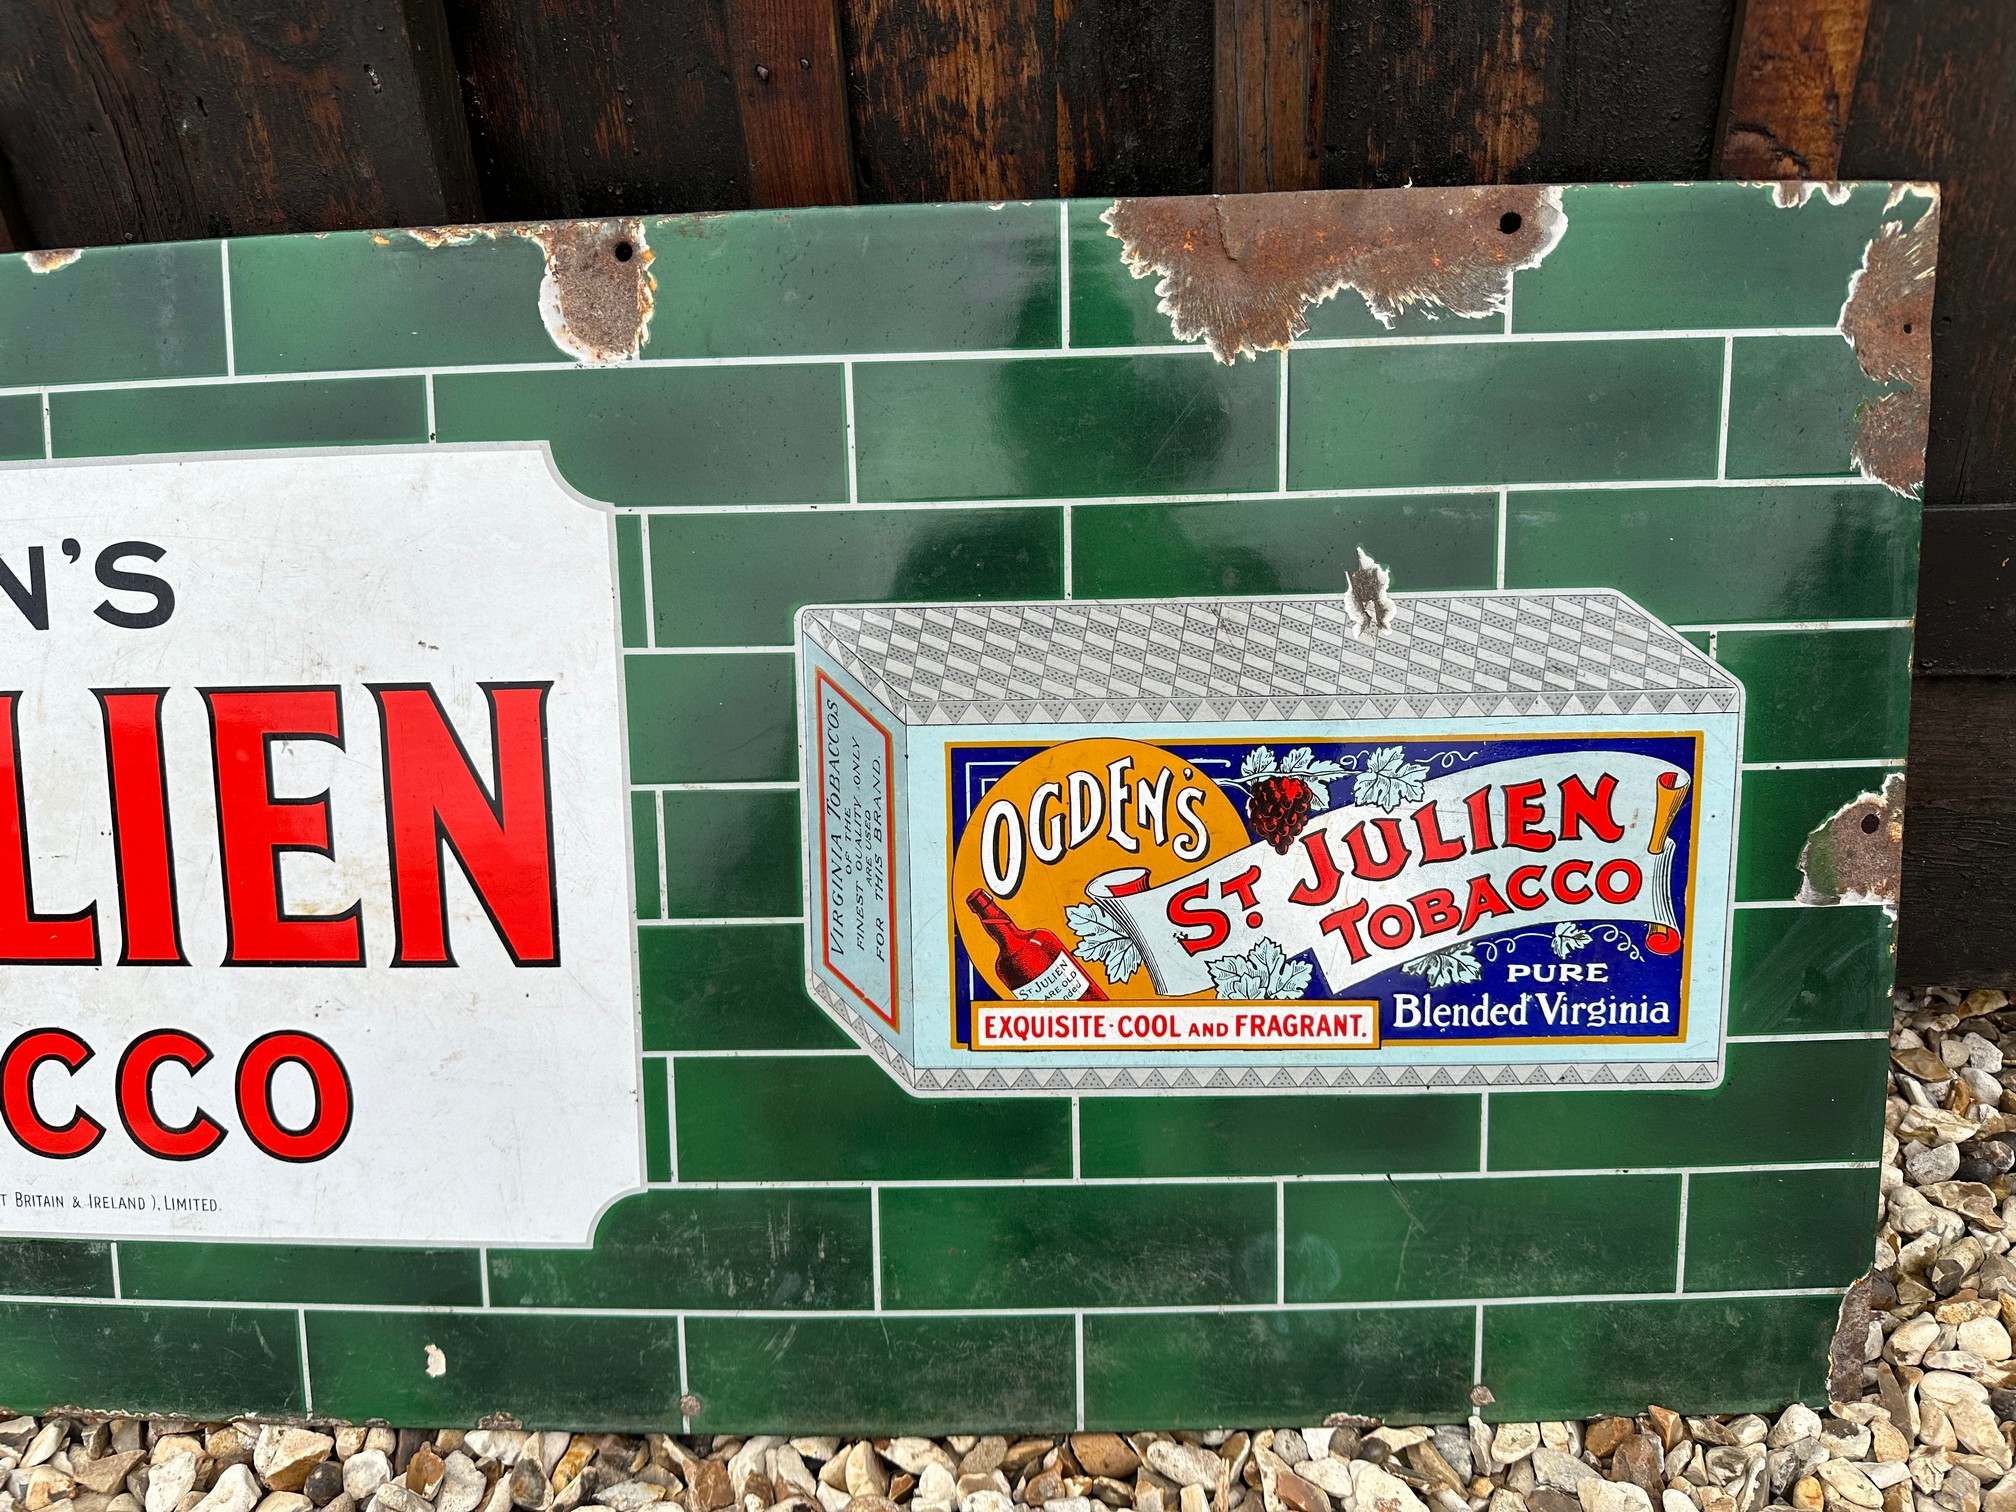 An Ogden's St. Julien Tobacco enamel advertising sign by Imperial Tobacco Co., 60 1/4 x 18". - Image 5 of 5